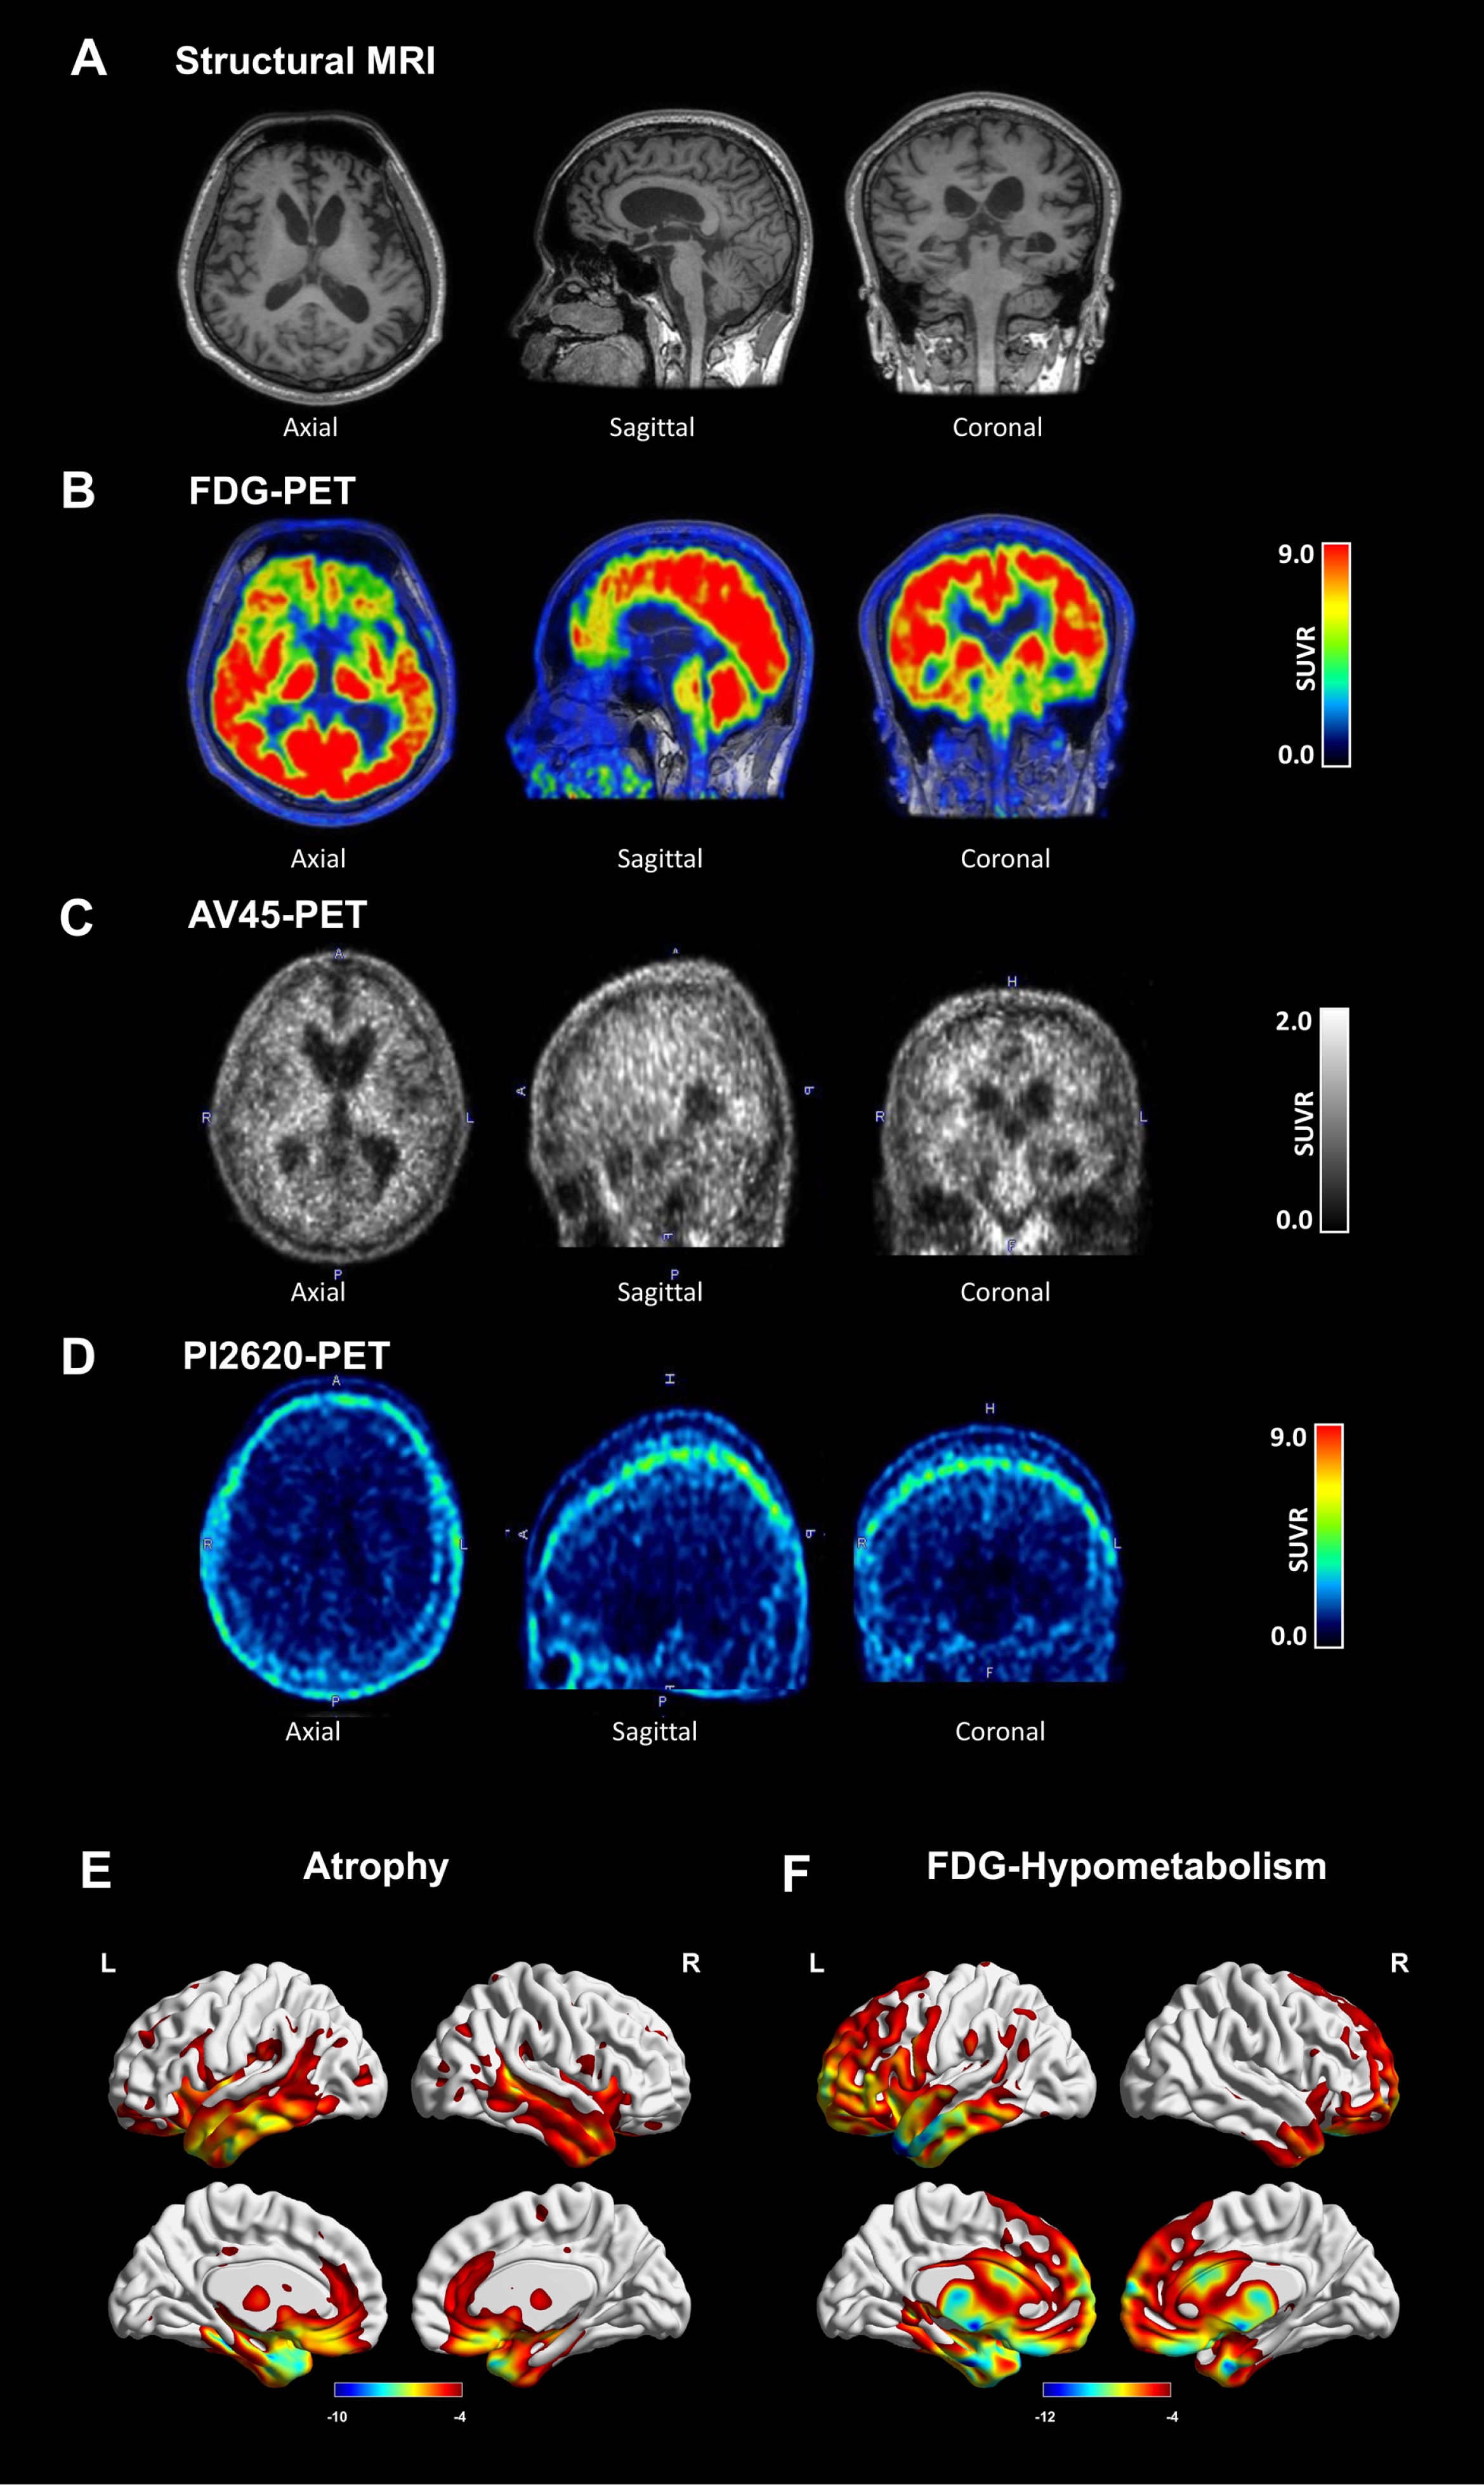 Neuroimages of the patient. Axial, sagittal, and coronal images of (A) structural MRI, (B) FDG-PET, (C) AV45-PET, and (D) PI2620 PET. (E) Atrophy and (F) Hypometabolism patterns in the patient in comparison with healthy controls. Detailed radiological Montreal Neurosciences Institution (MNI) coordinates of the clusters are shown in Table 1.